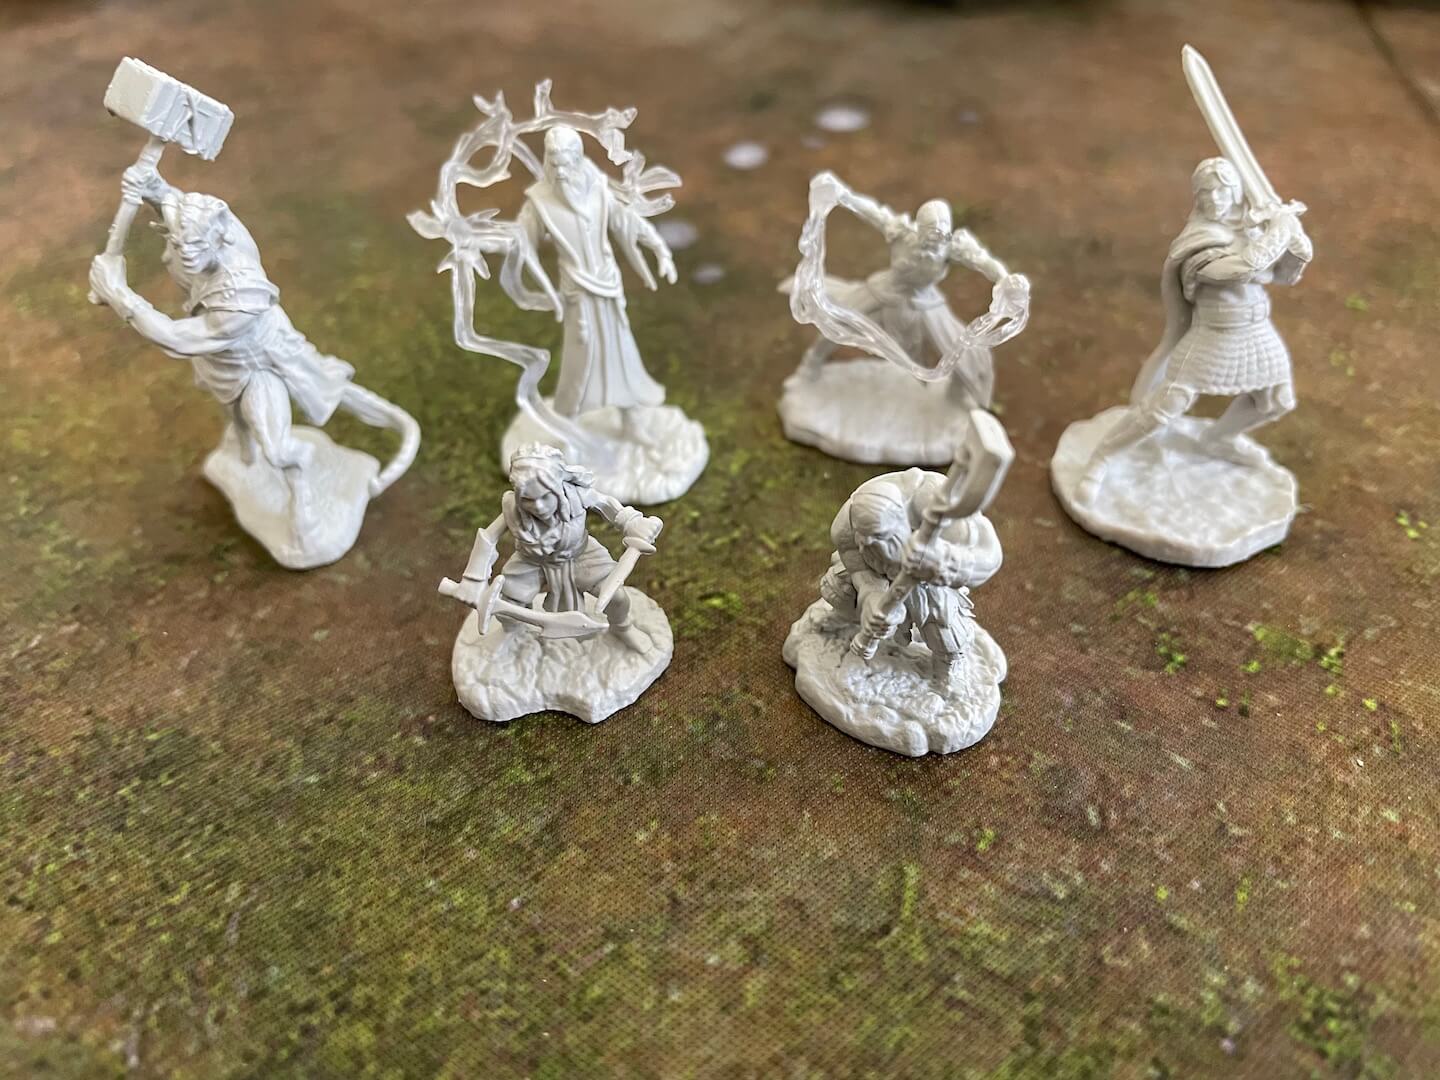 Heroes and characters from Wave 2 of WizKids Critical Role Unpainted Miniatures